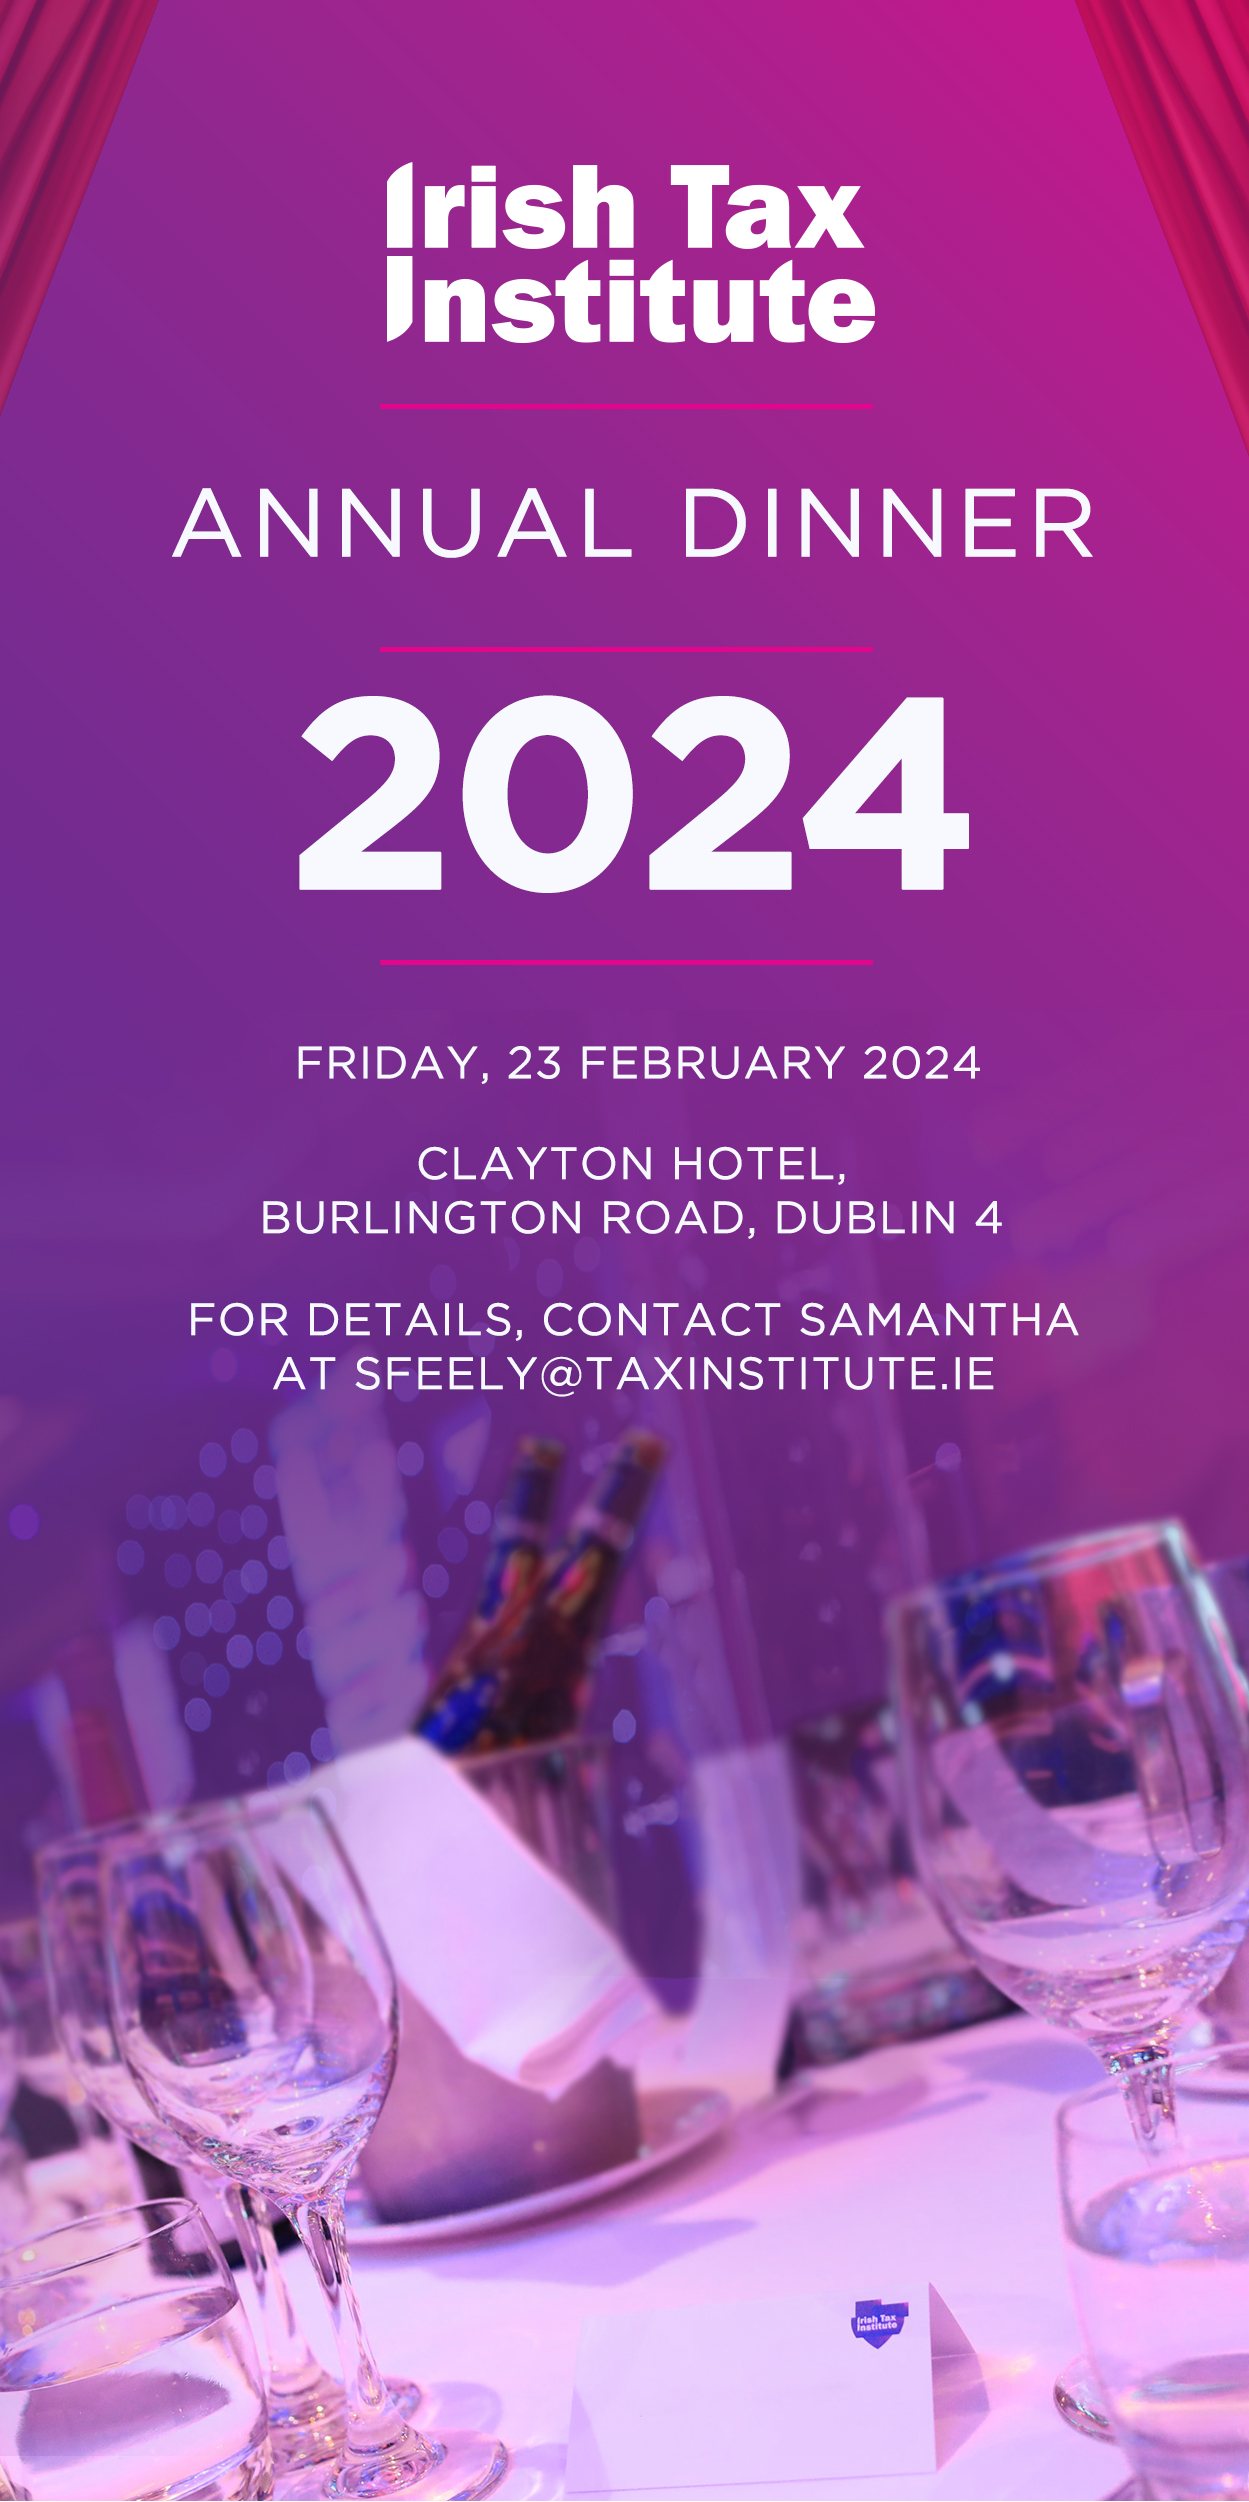 Irish Tax Institute’s Annual Dinner 2024 is on Friday, 23 February 2024 in the Clayton Hotel, Burlington Road, Dublin 4. For details, contact Samantha at sfeely@taxinstitute.ie.